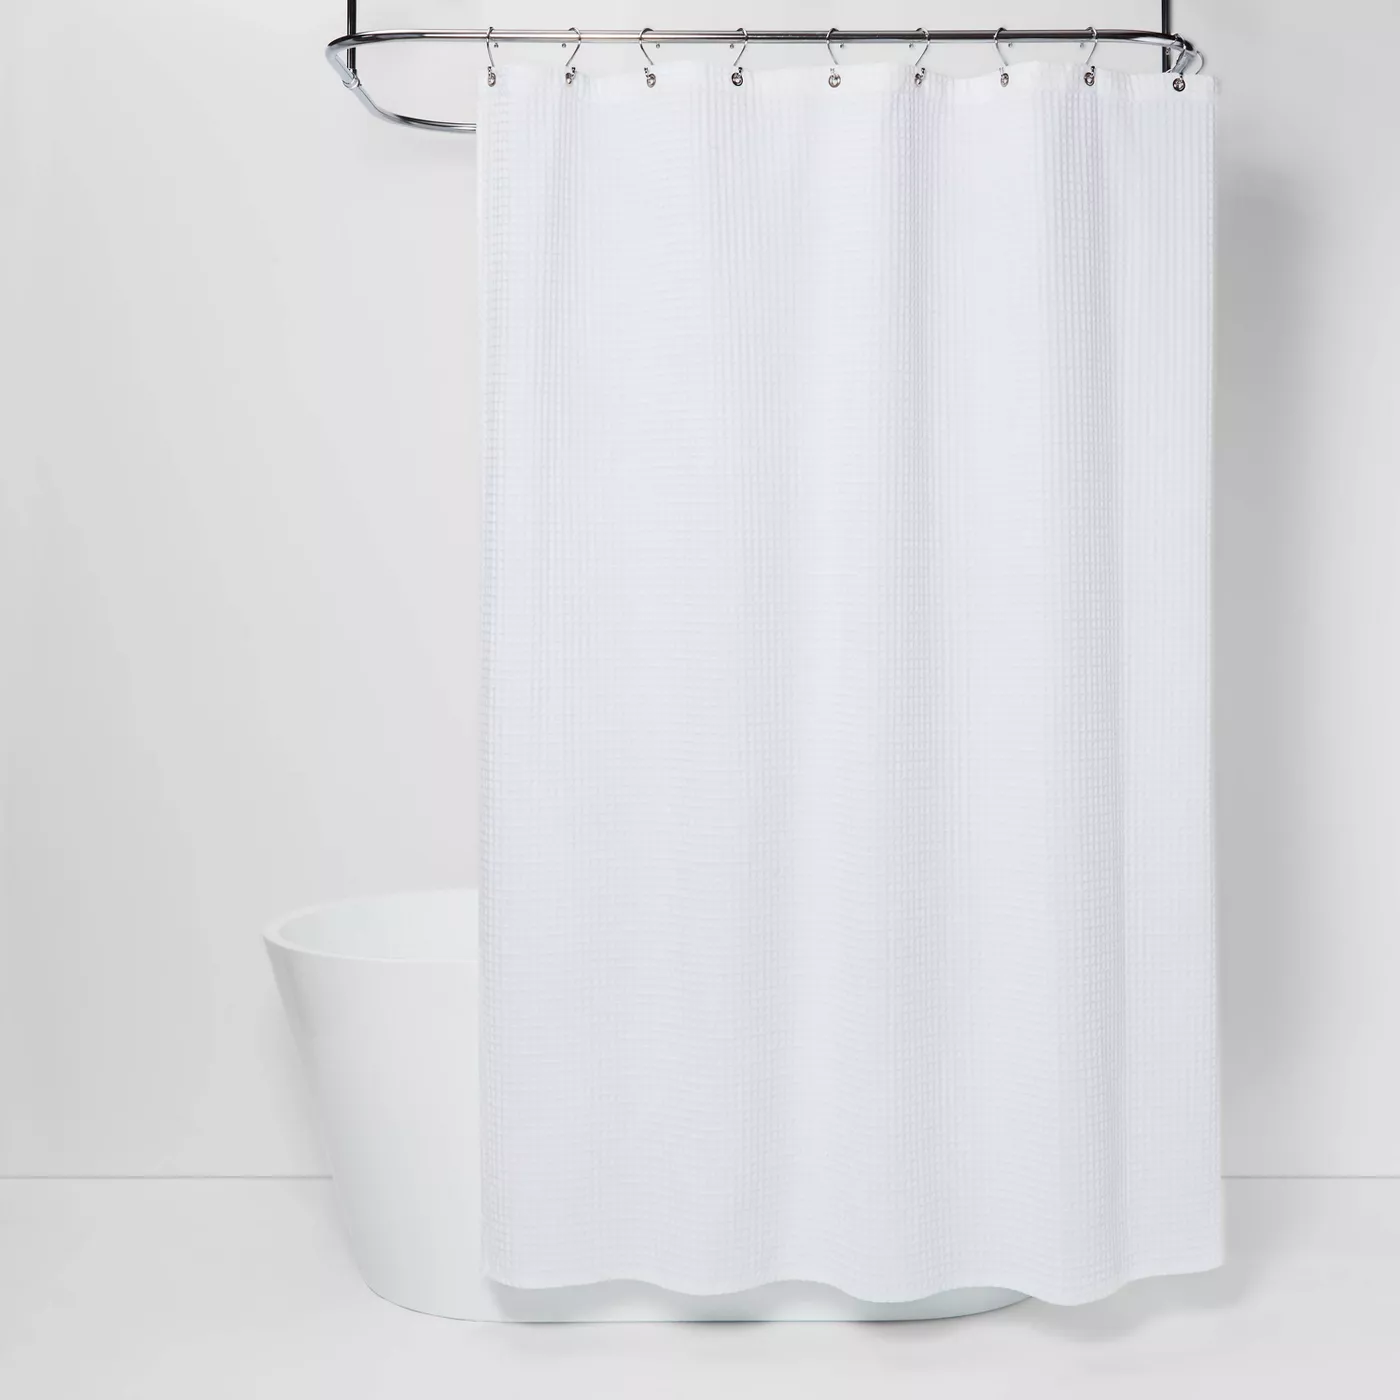 10 Best Shower Curtains For Small, Best Shower Curtains For Small Bathrooms